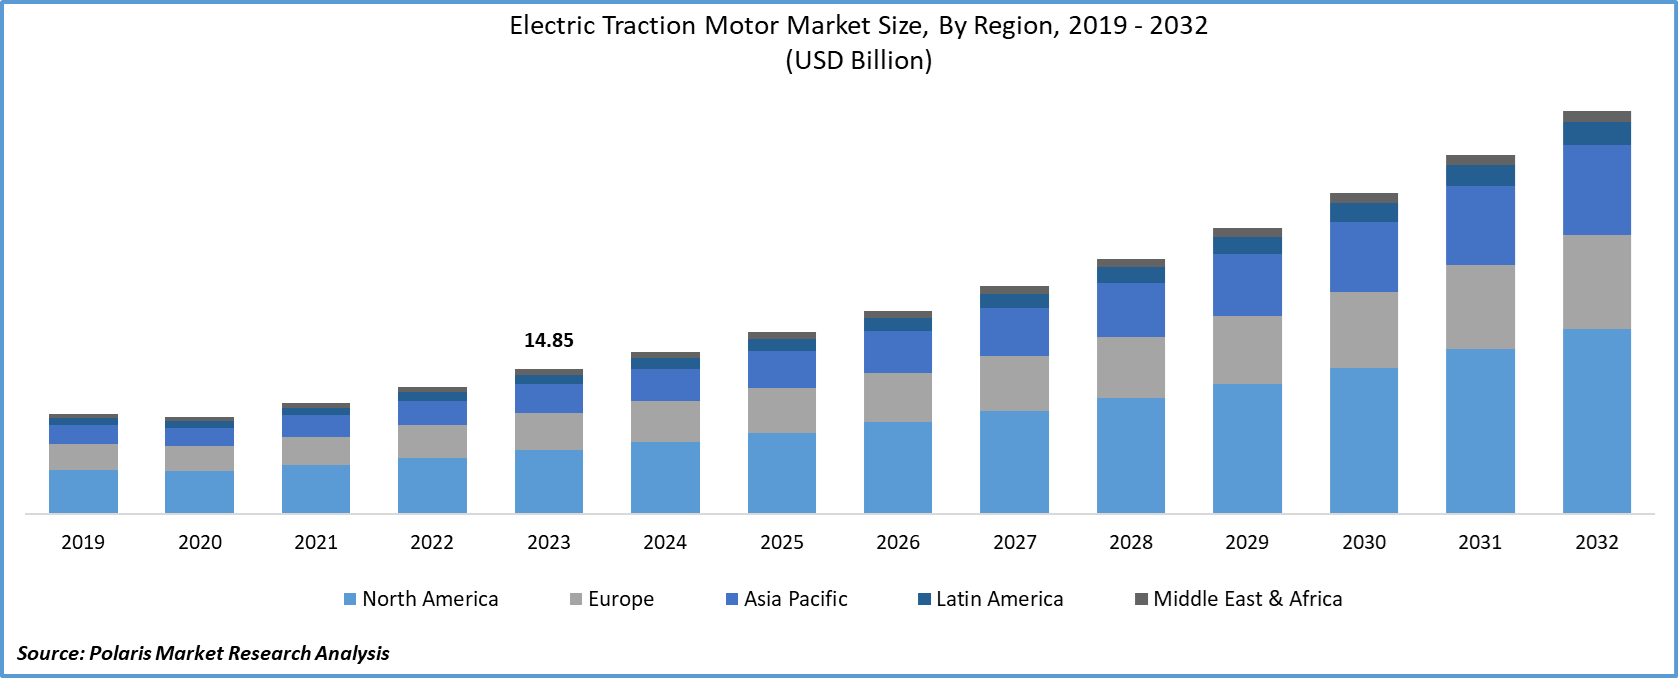 Electric Traction Motor Market Size